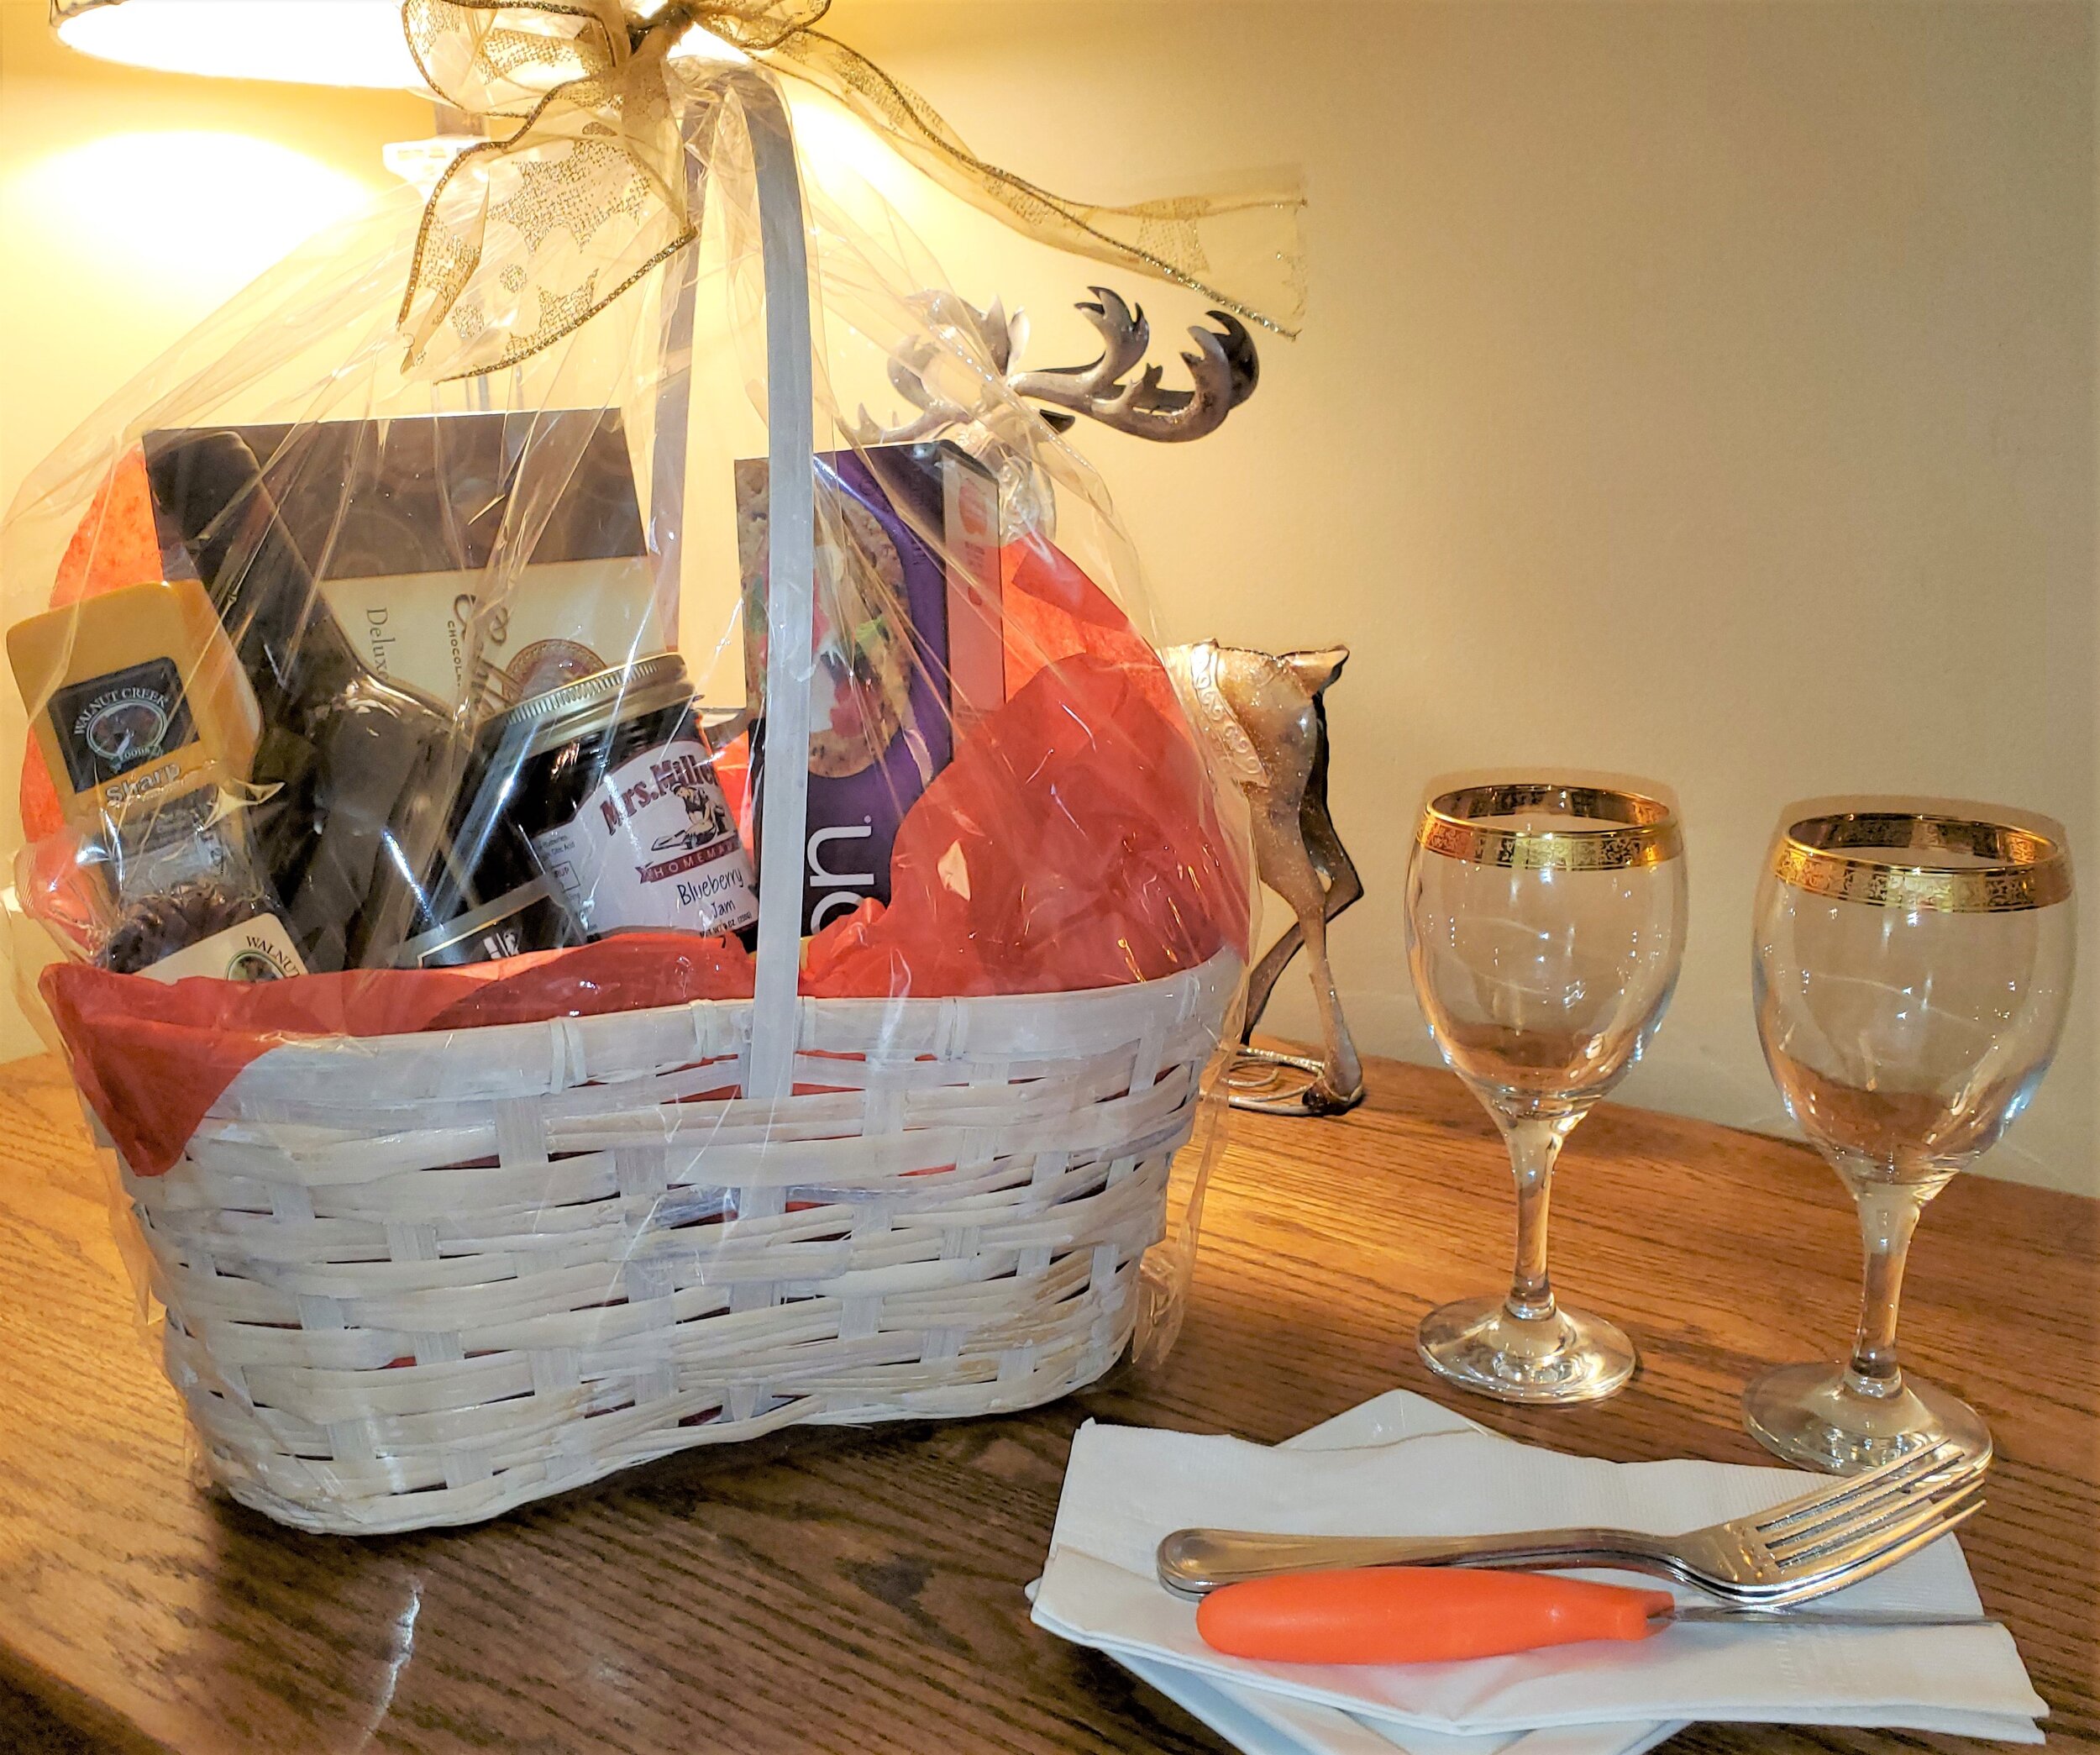 A wrapped gift basked on a table with wine glasses